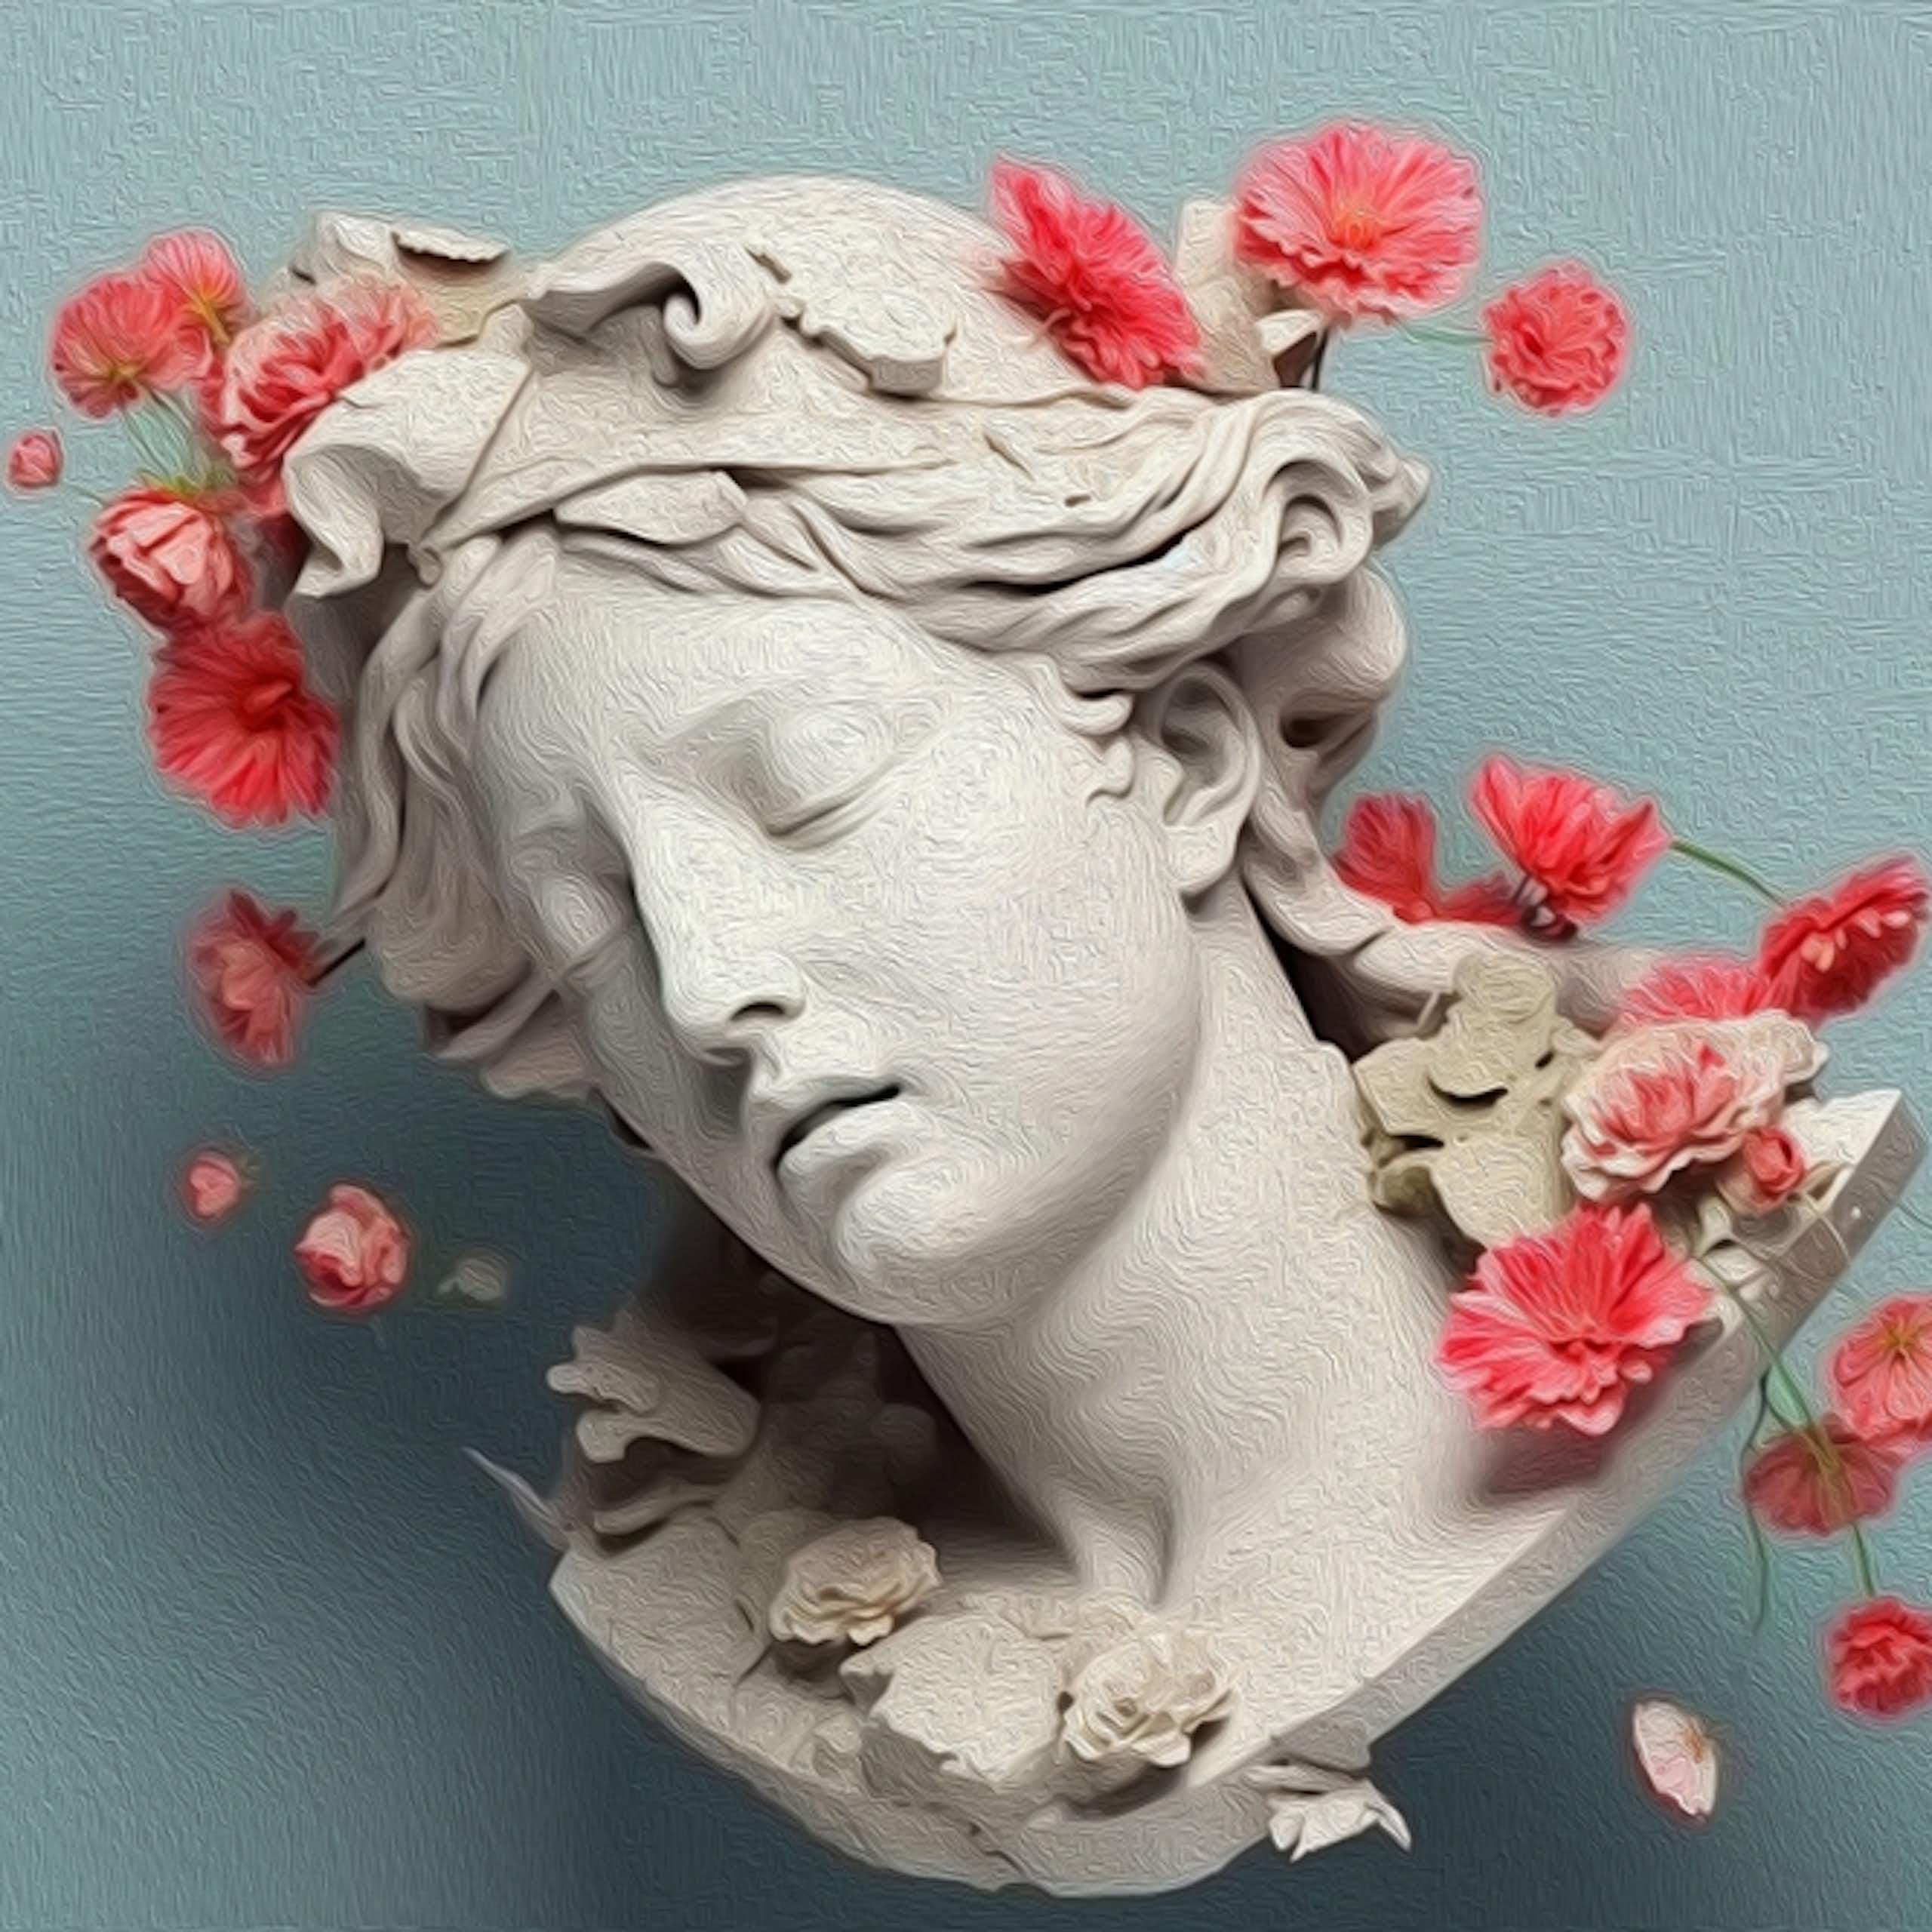 Greco-Roman bust of woman, on its side, with pink flowers scattered